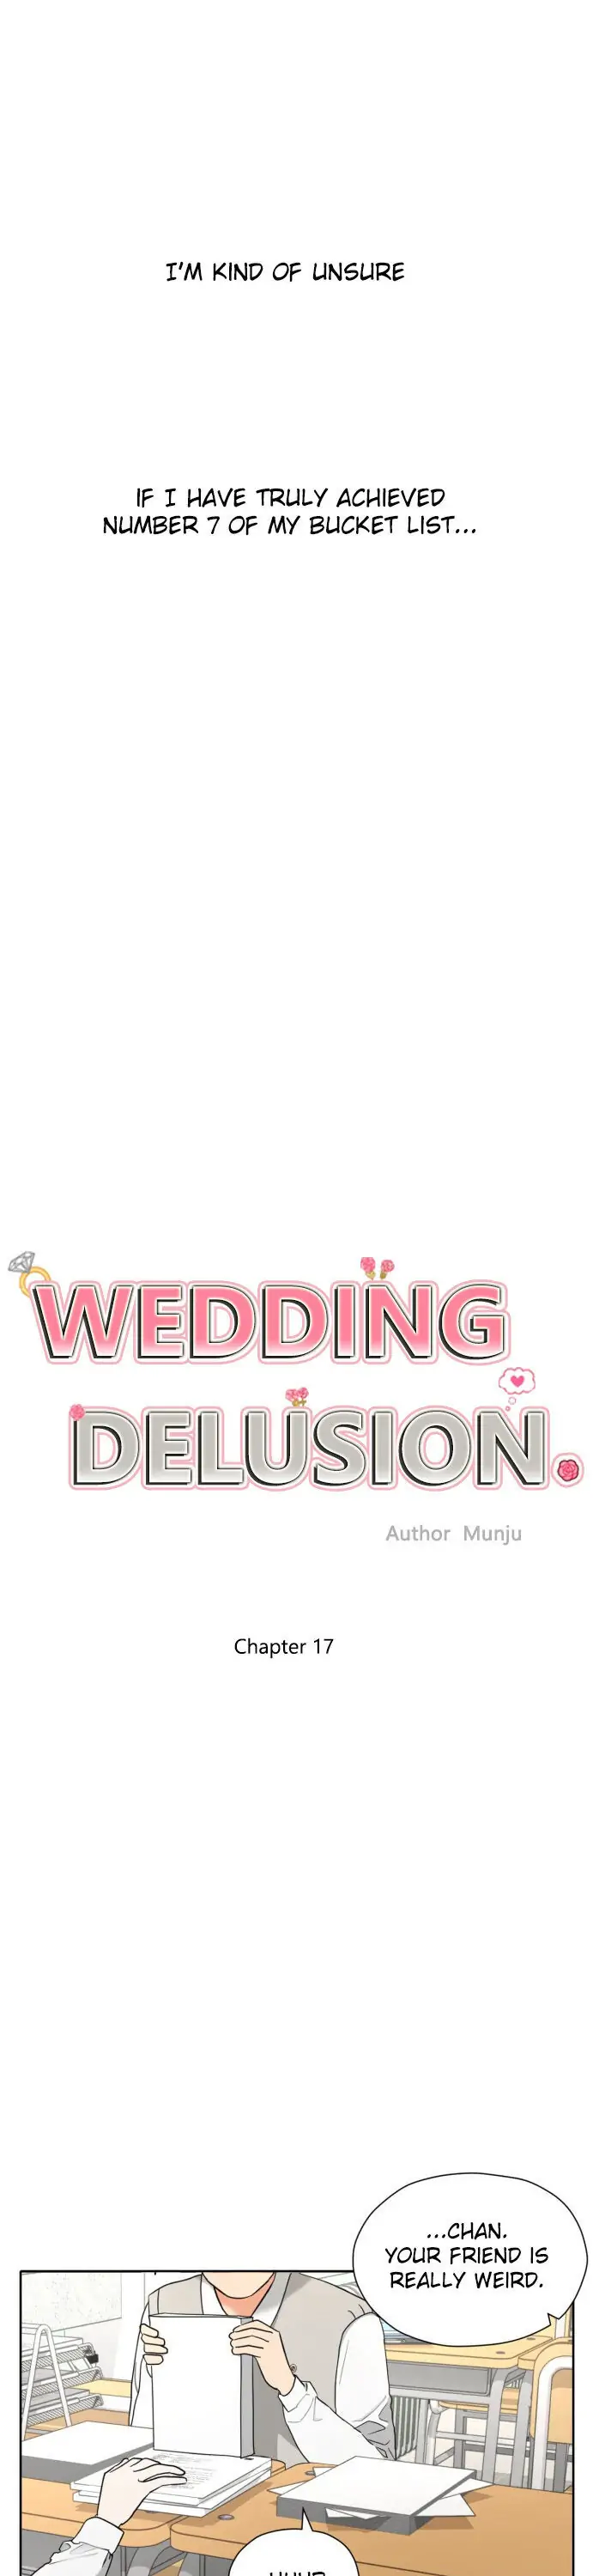 Wedding Delusion chapter 17